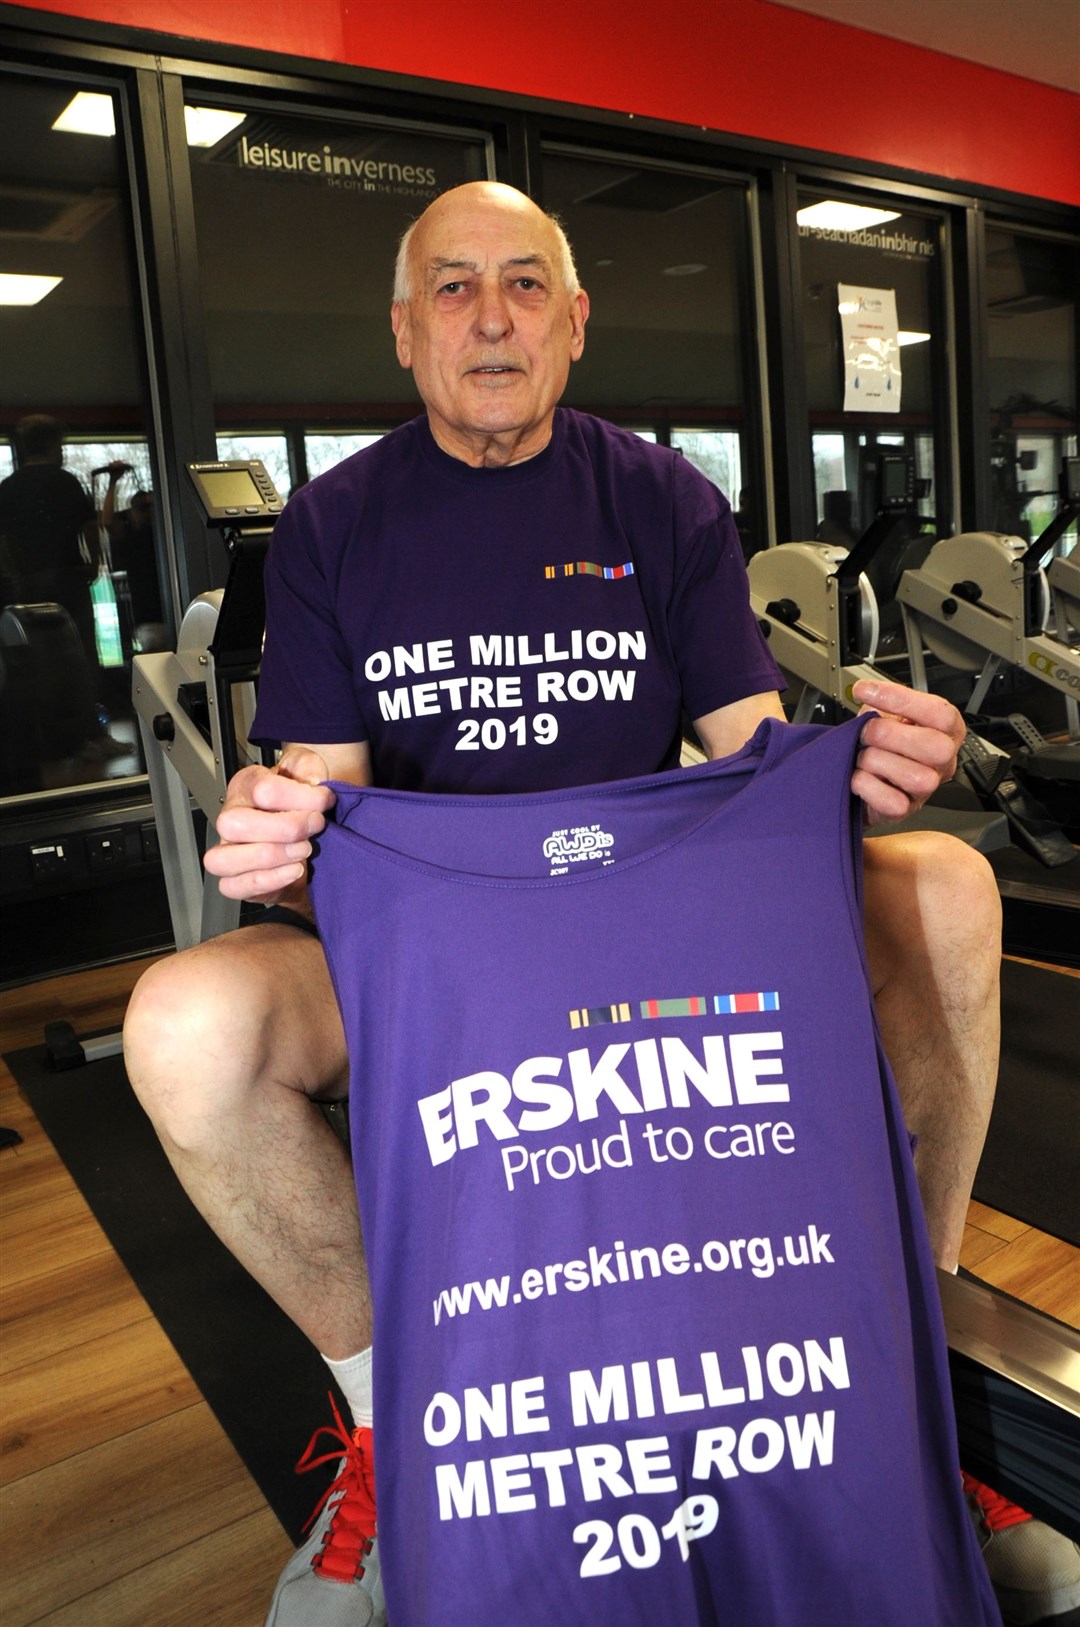 John Baillie who is rowing one million metres in aid of the Erskine charity.